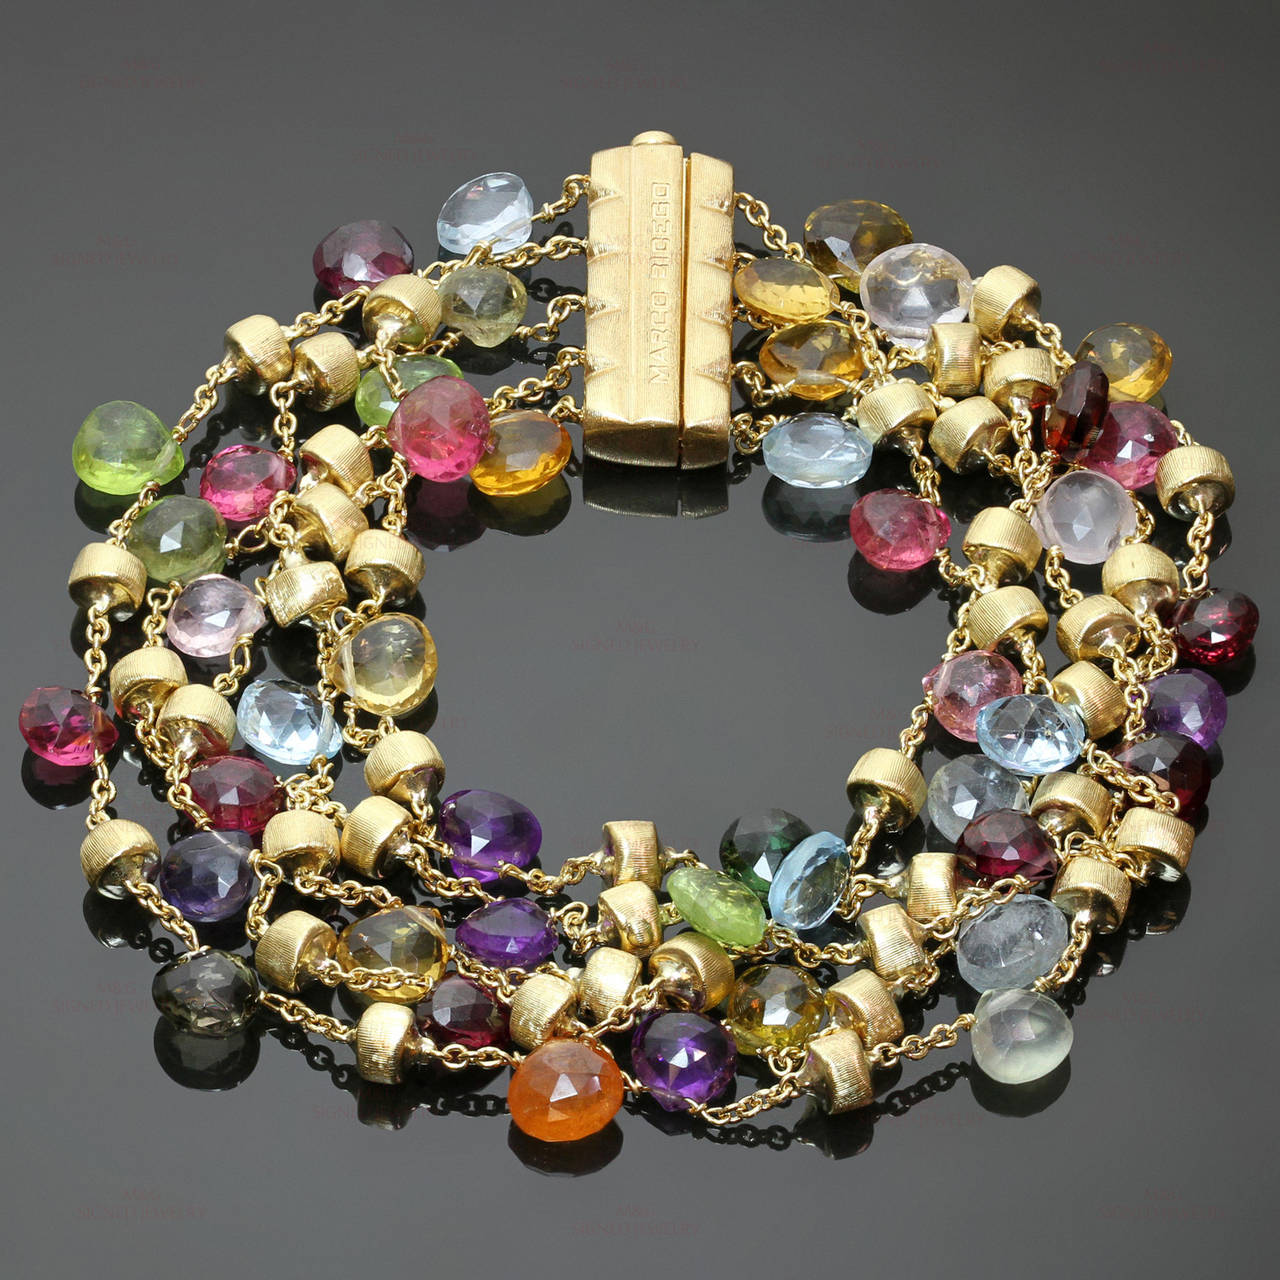 This stunning Marco Bicego bracelet from the playful Paradise collection features a 5-strand design of faceted semi-precious gemstones, accented with hand-engraved 18k gold beads. Each piece in this collection has a unique array of gemstones and may